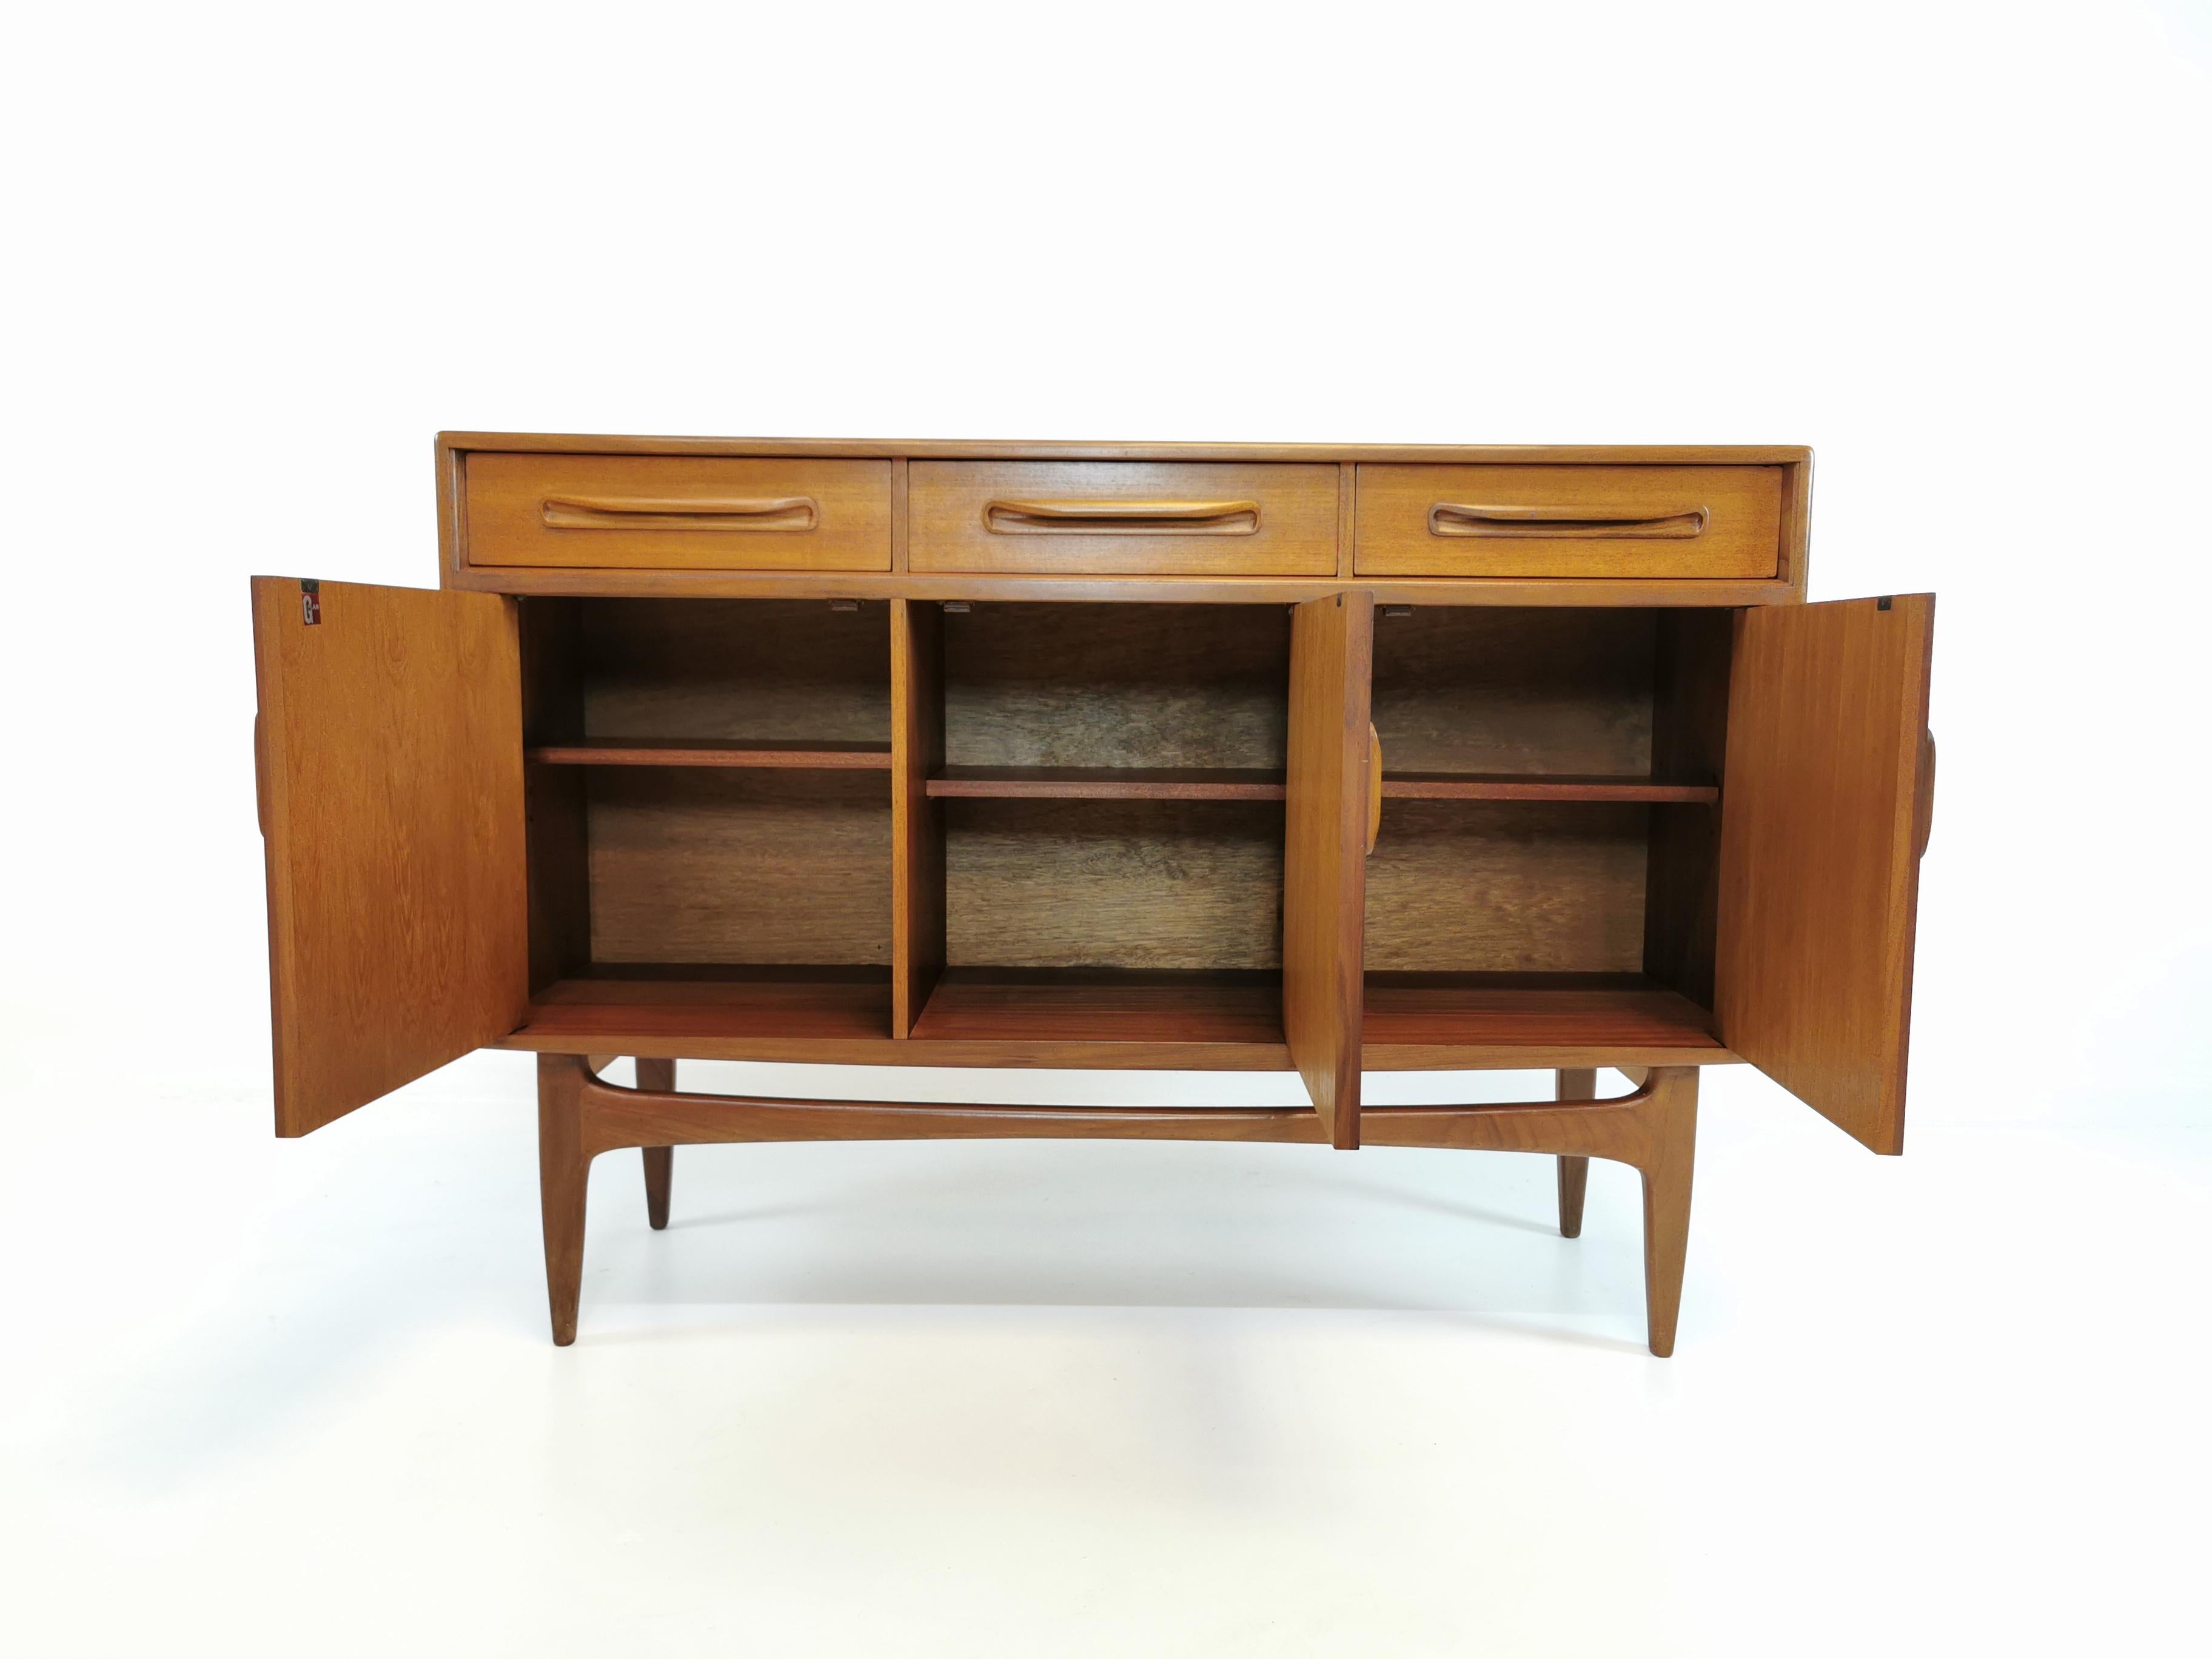 Compact but tall, G-Plan Sideboard designed by V B Wilkins for E. Gomme / G-Plan, England 1960s. 

Featuring drawers, spacious cabinets and internal shelving.